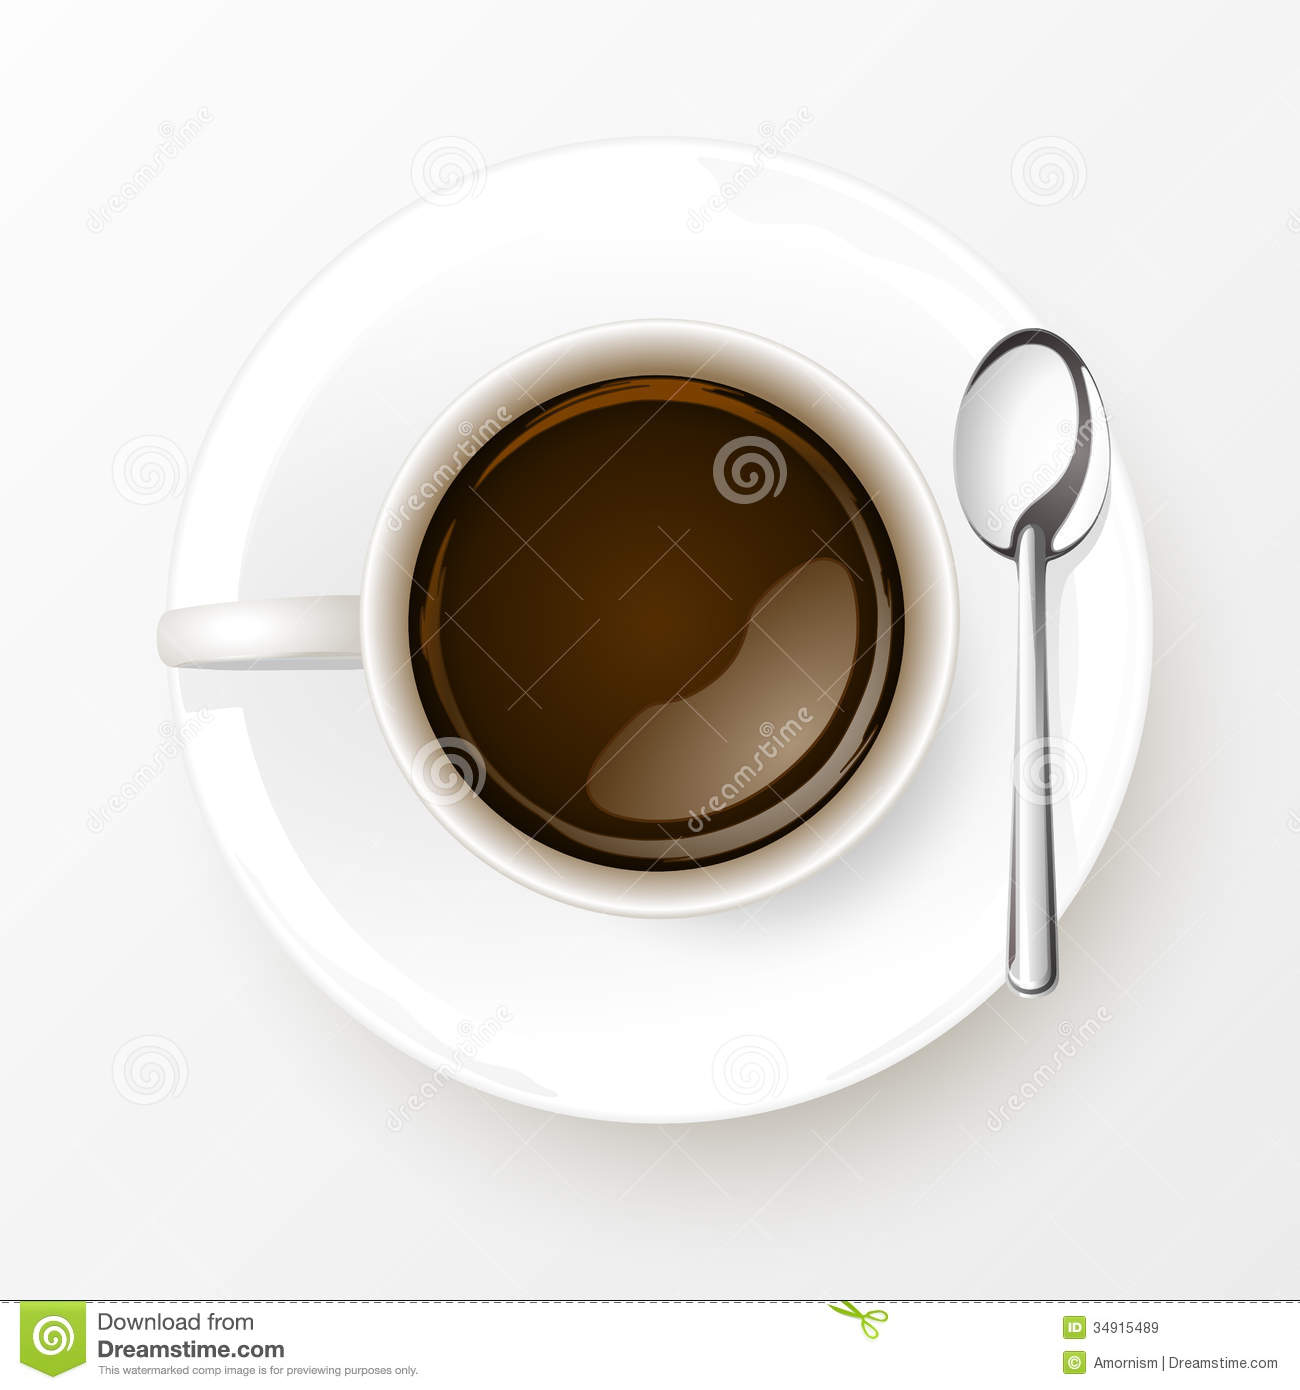 Cup Of Coffee With Spoon On White Background Royalty Free Stock Images